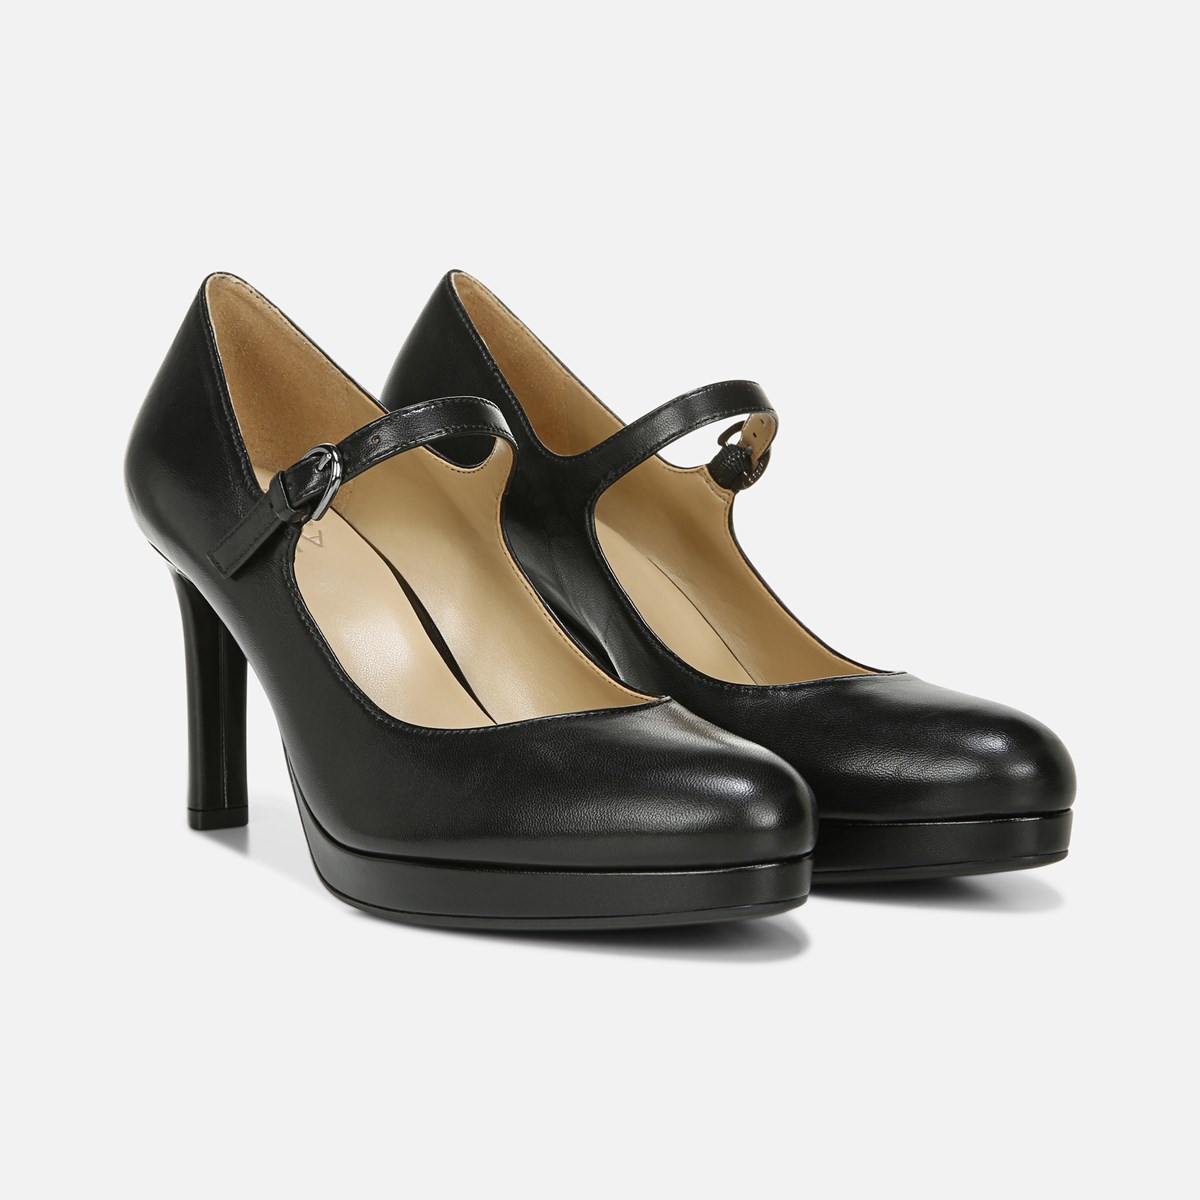 Naturalizer Mary Jane Pump in Black Leather Heels - Naturalizer.com